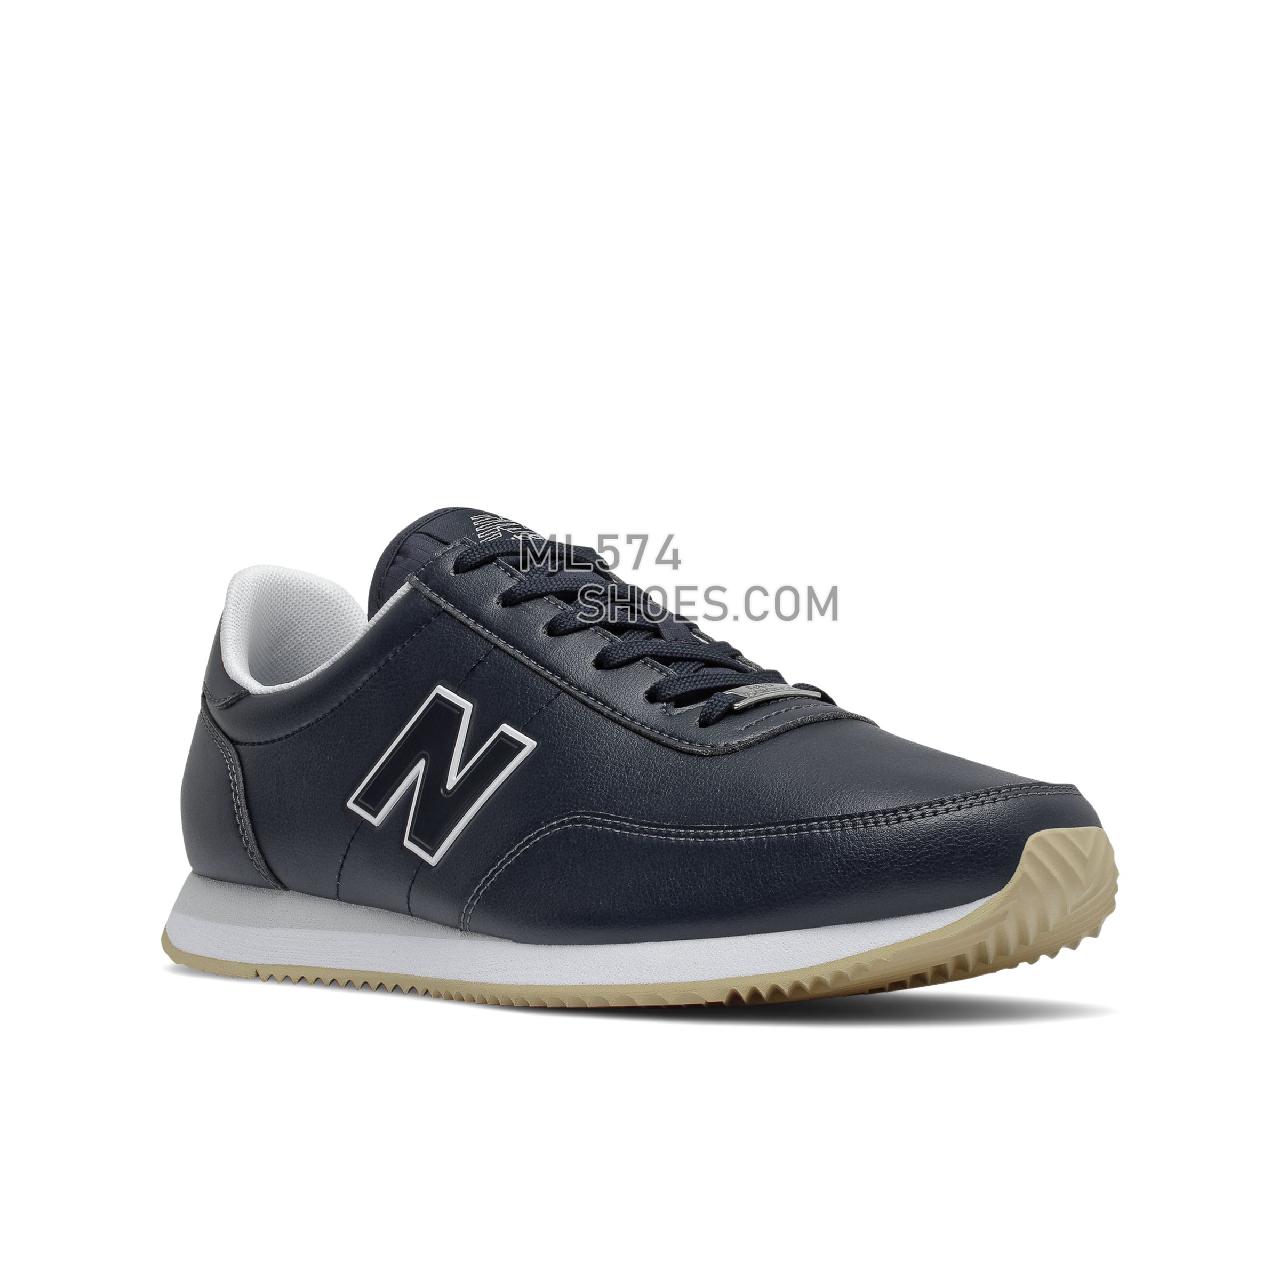 New Balance UL720V1 - Unisex Men's Women's Classic Sneakers - Eclipse with Nb White - UL720WT1